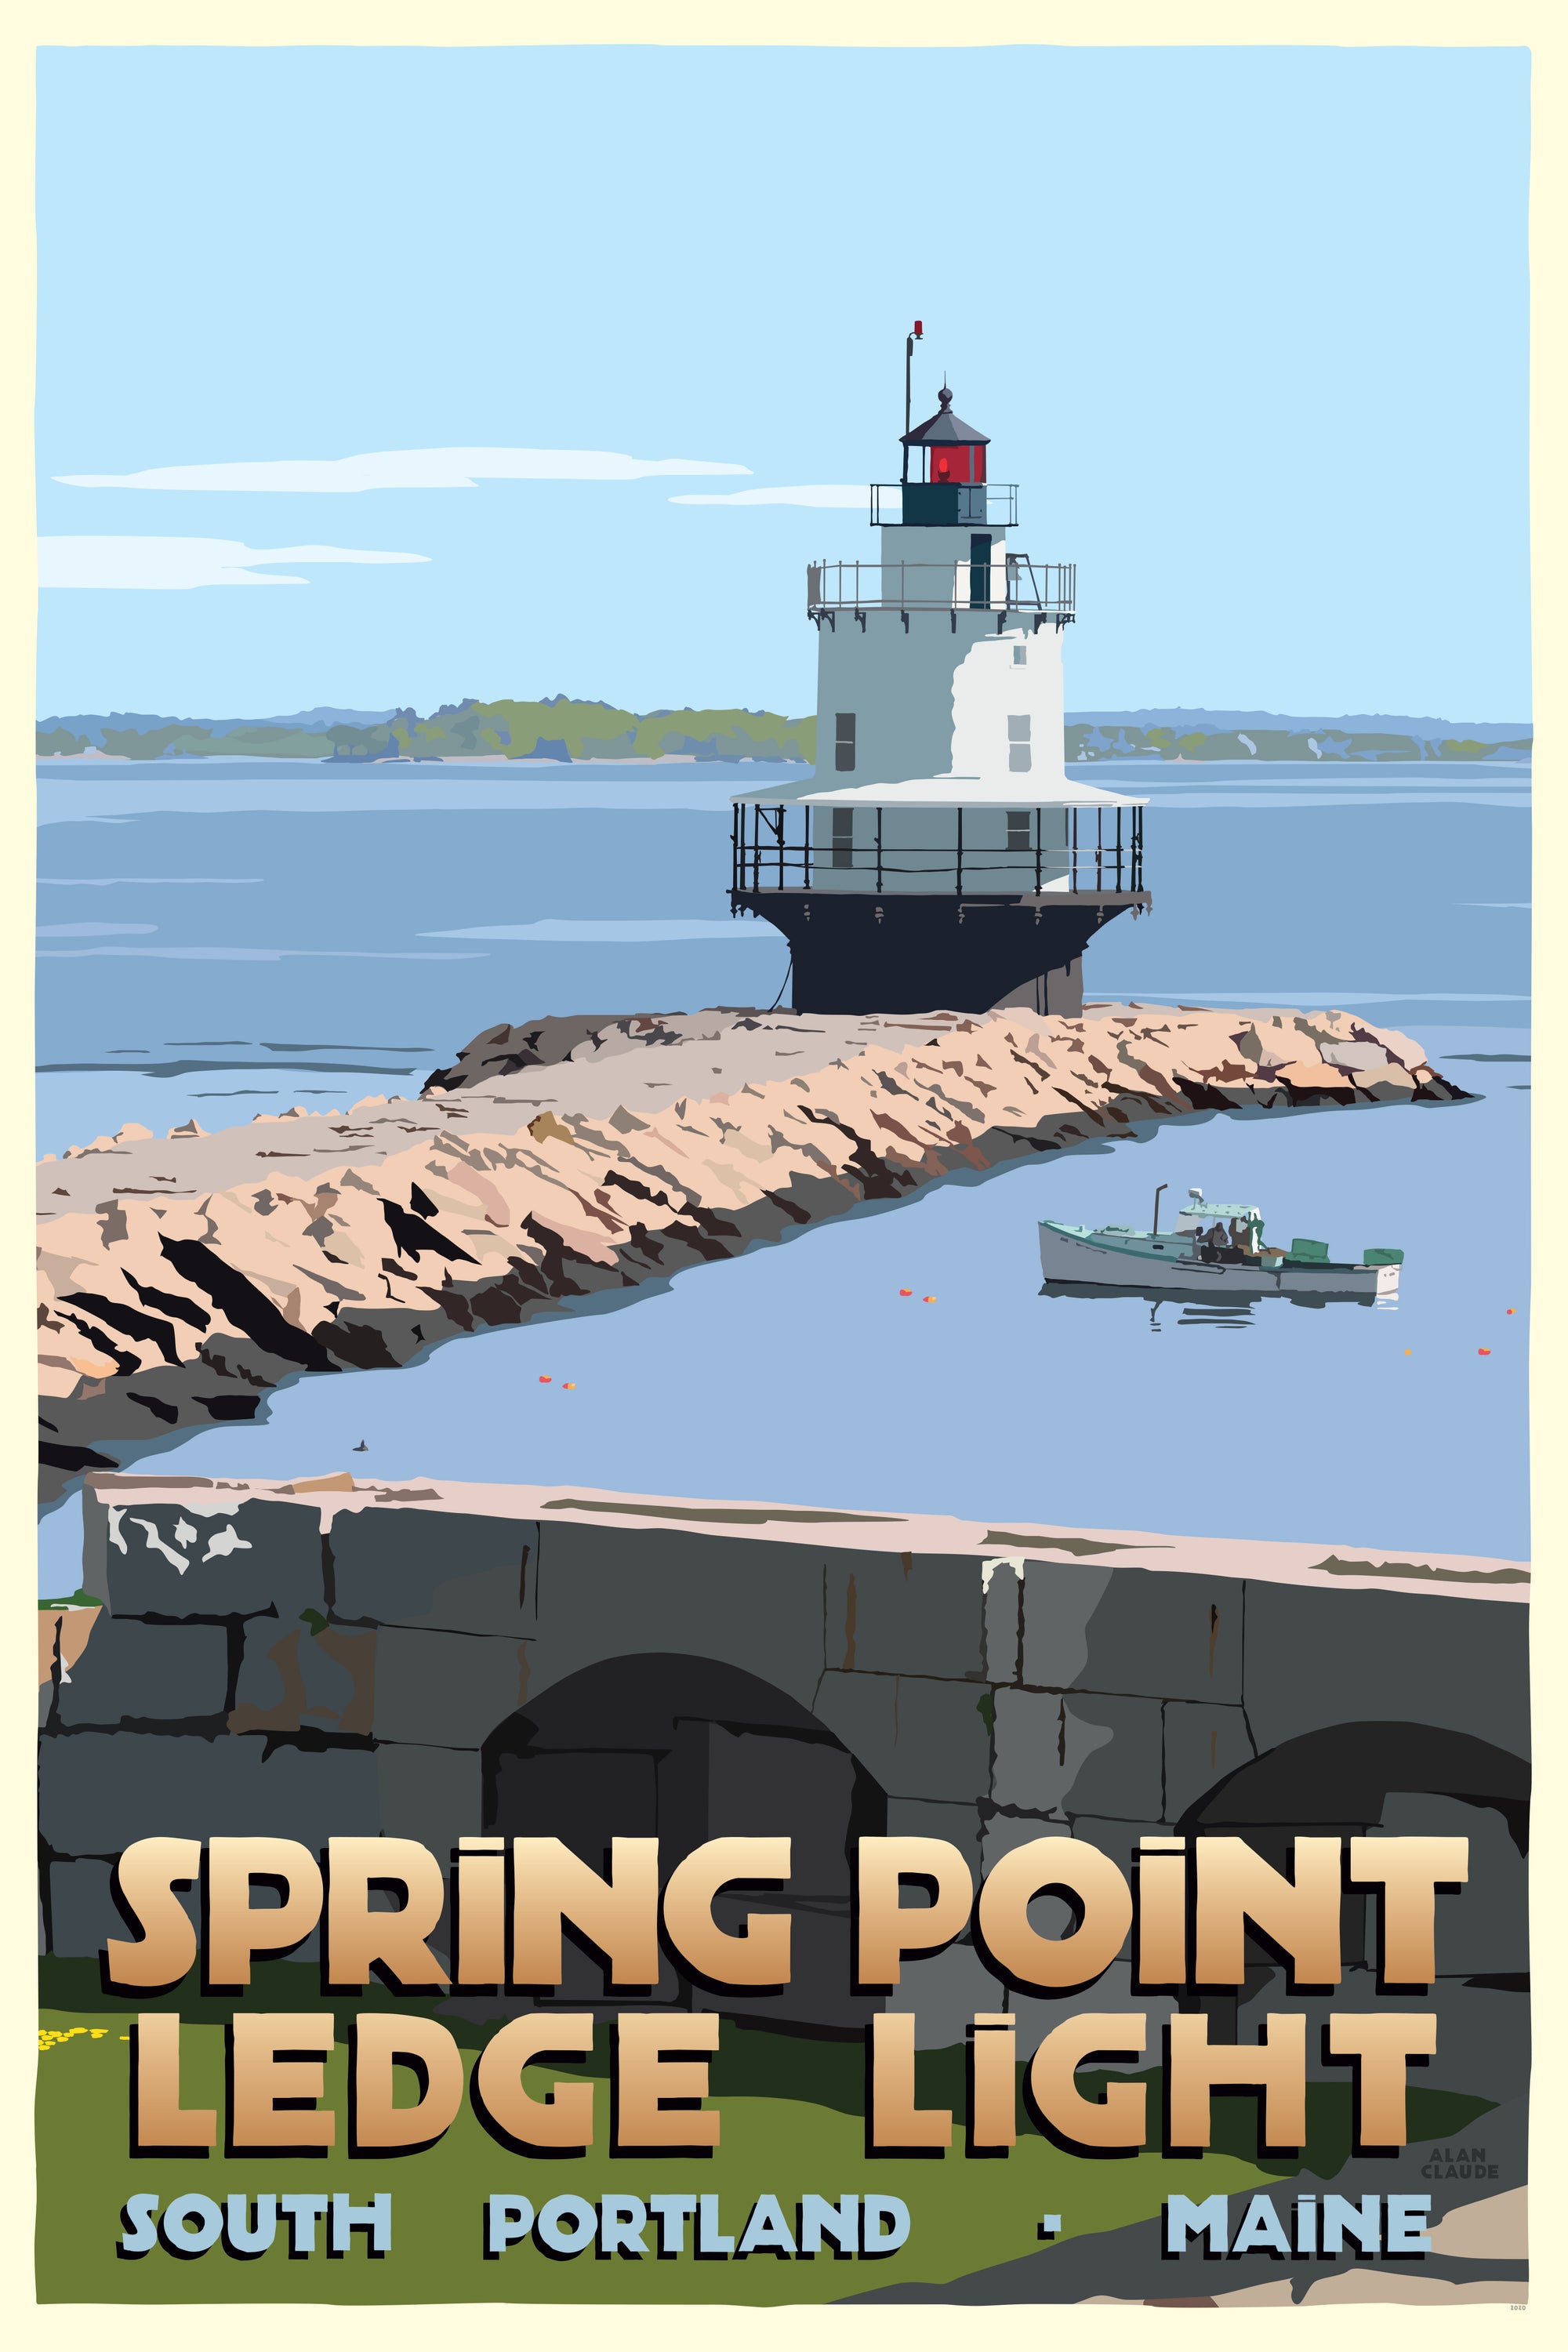 Spring Point Ledge Light Art Print 24" x 36" Travel Poster By Alan Claude - Maine